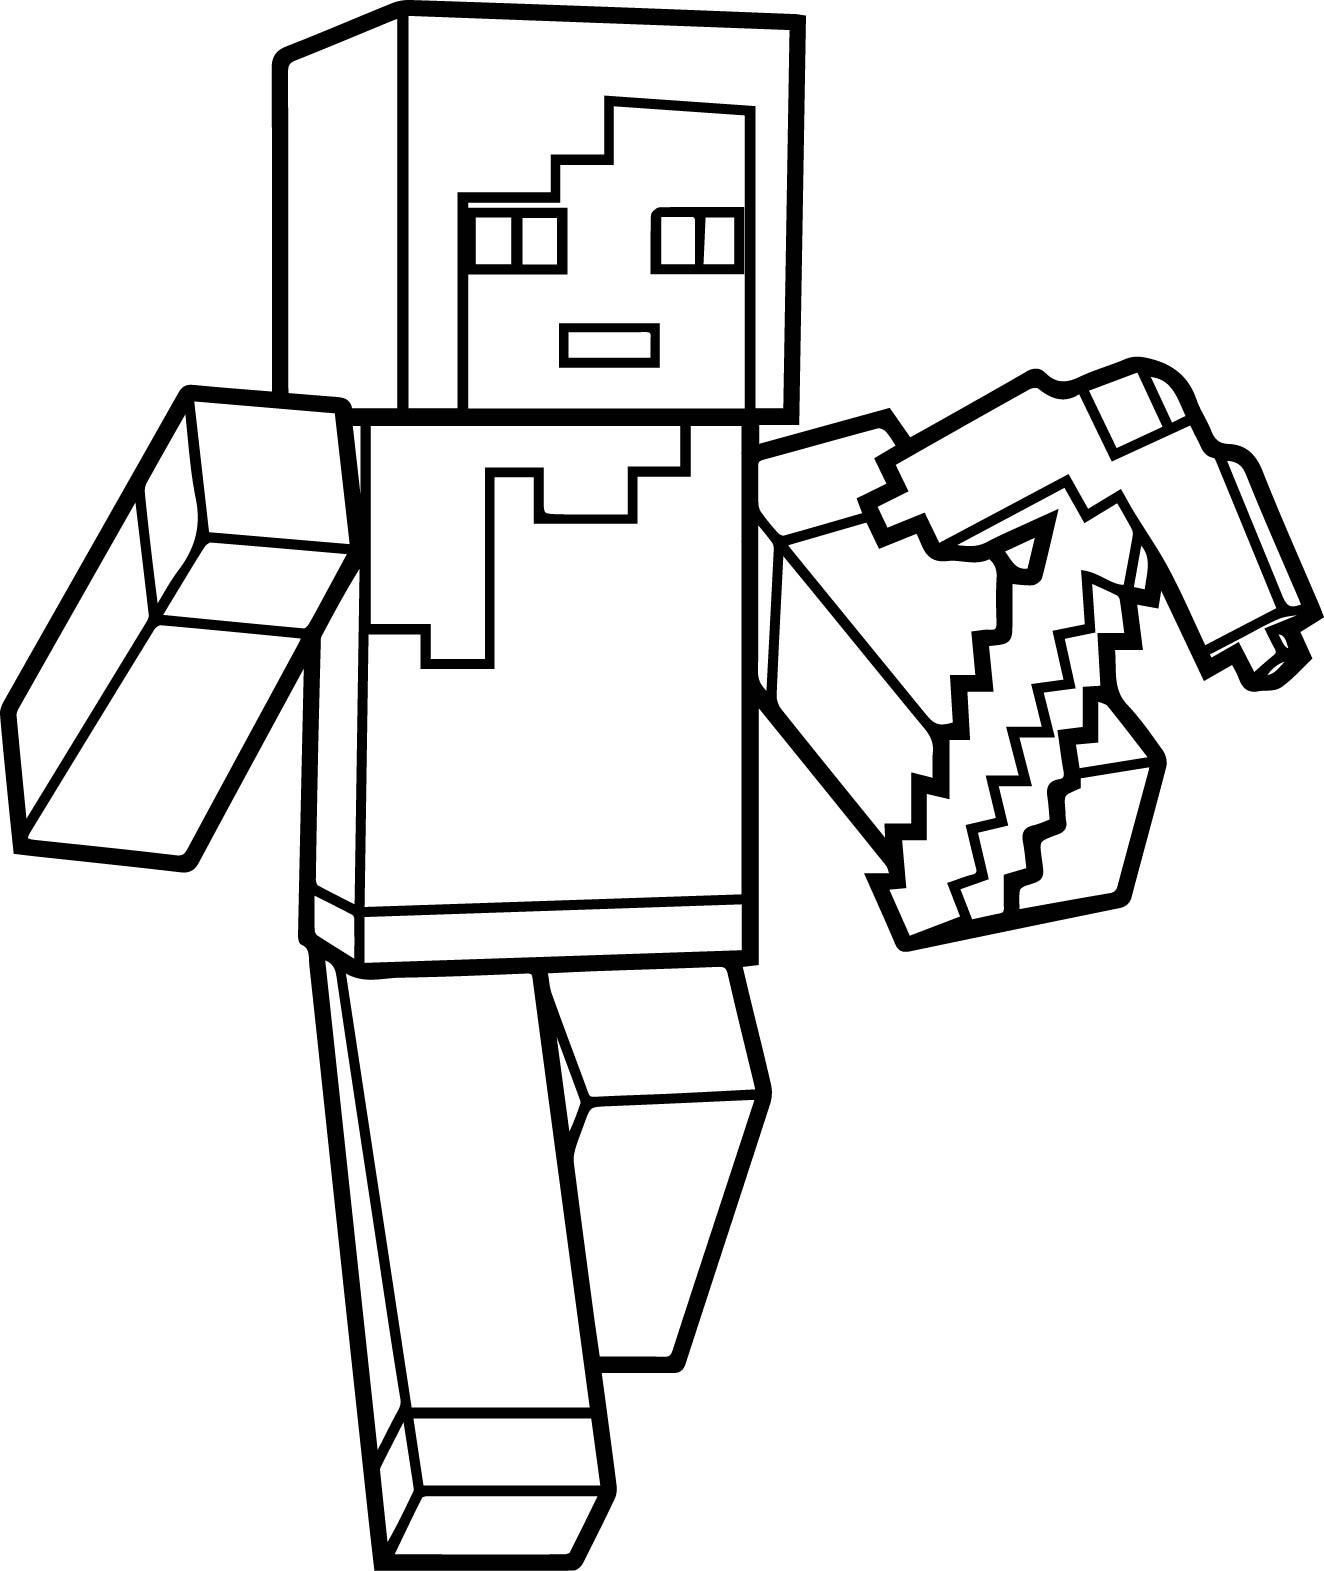 Minecraft Coloring Pages
 Minecraft Coloring Pages Best Coloring Pages For Kids